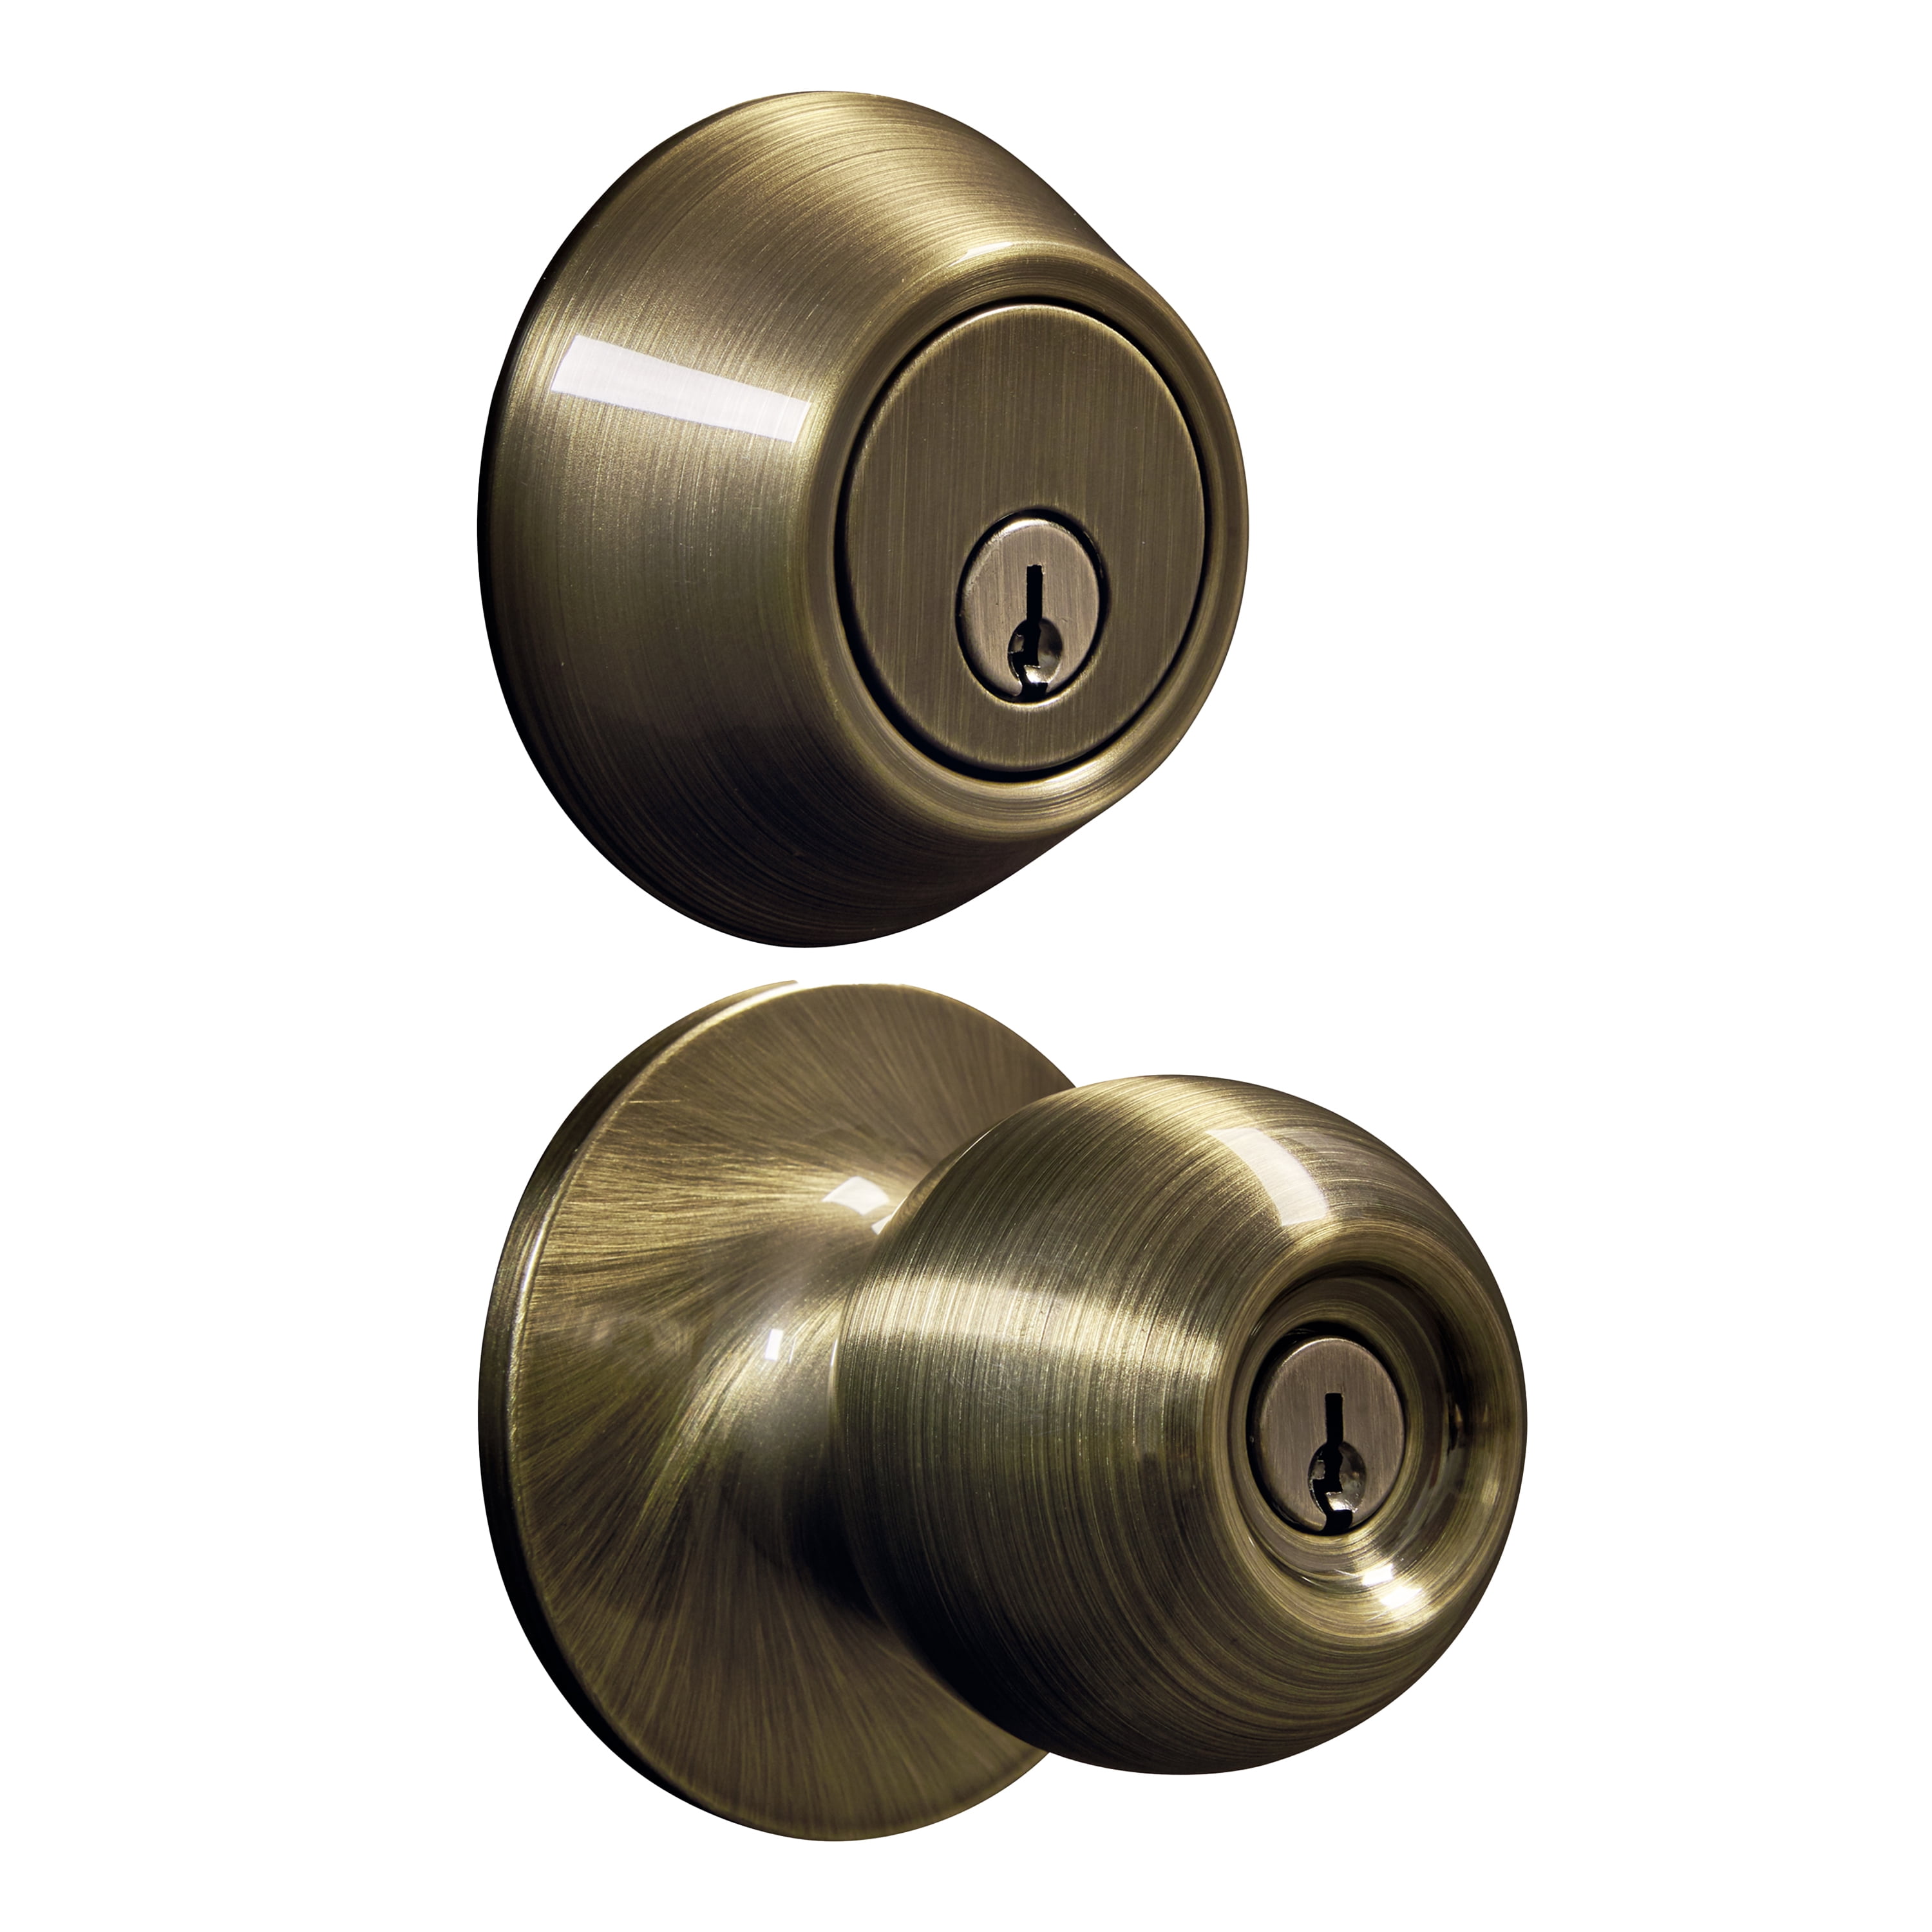 Polish Gold Brass Finish Fits all Standard Doors Door Knob With Keyed Entry 